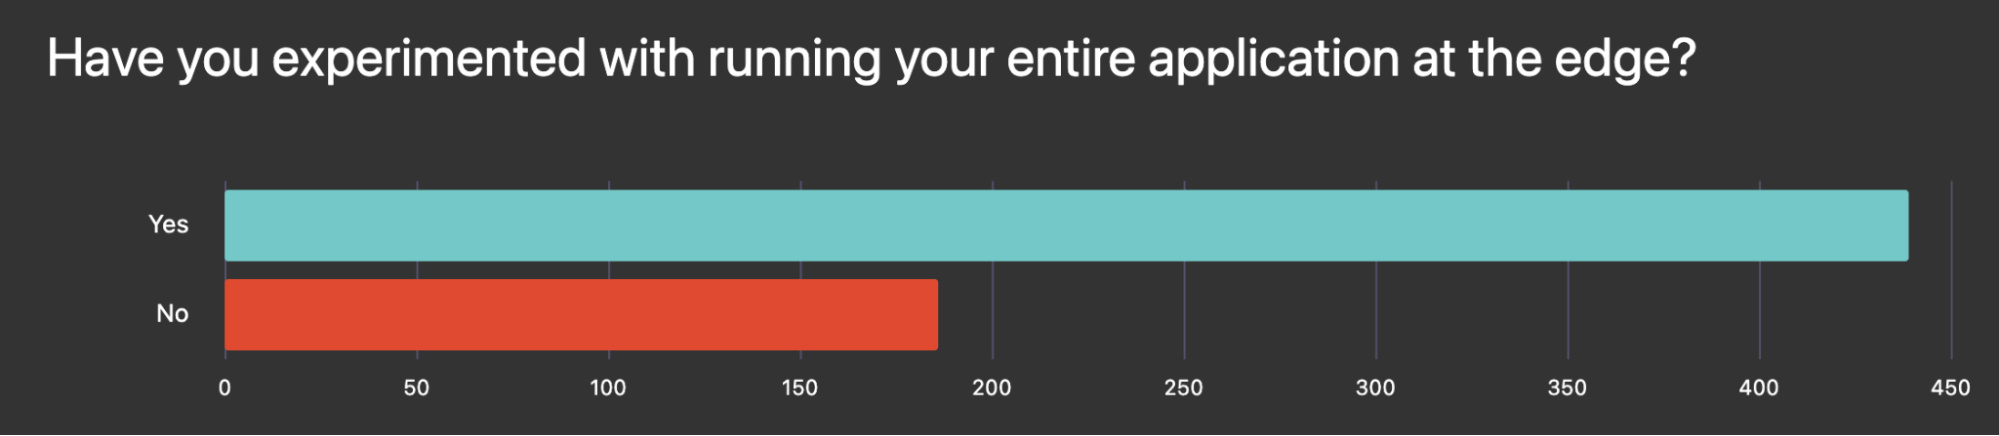 Most developers have hosted entire apps at the edge